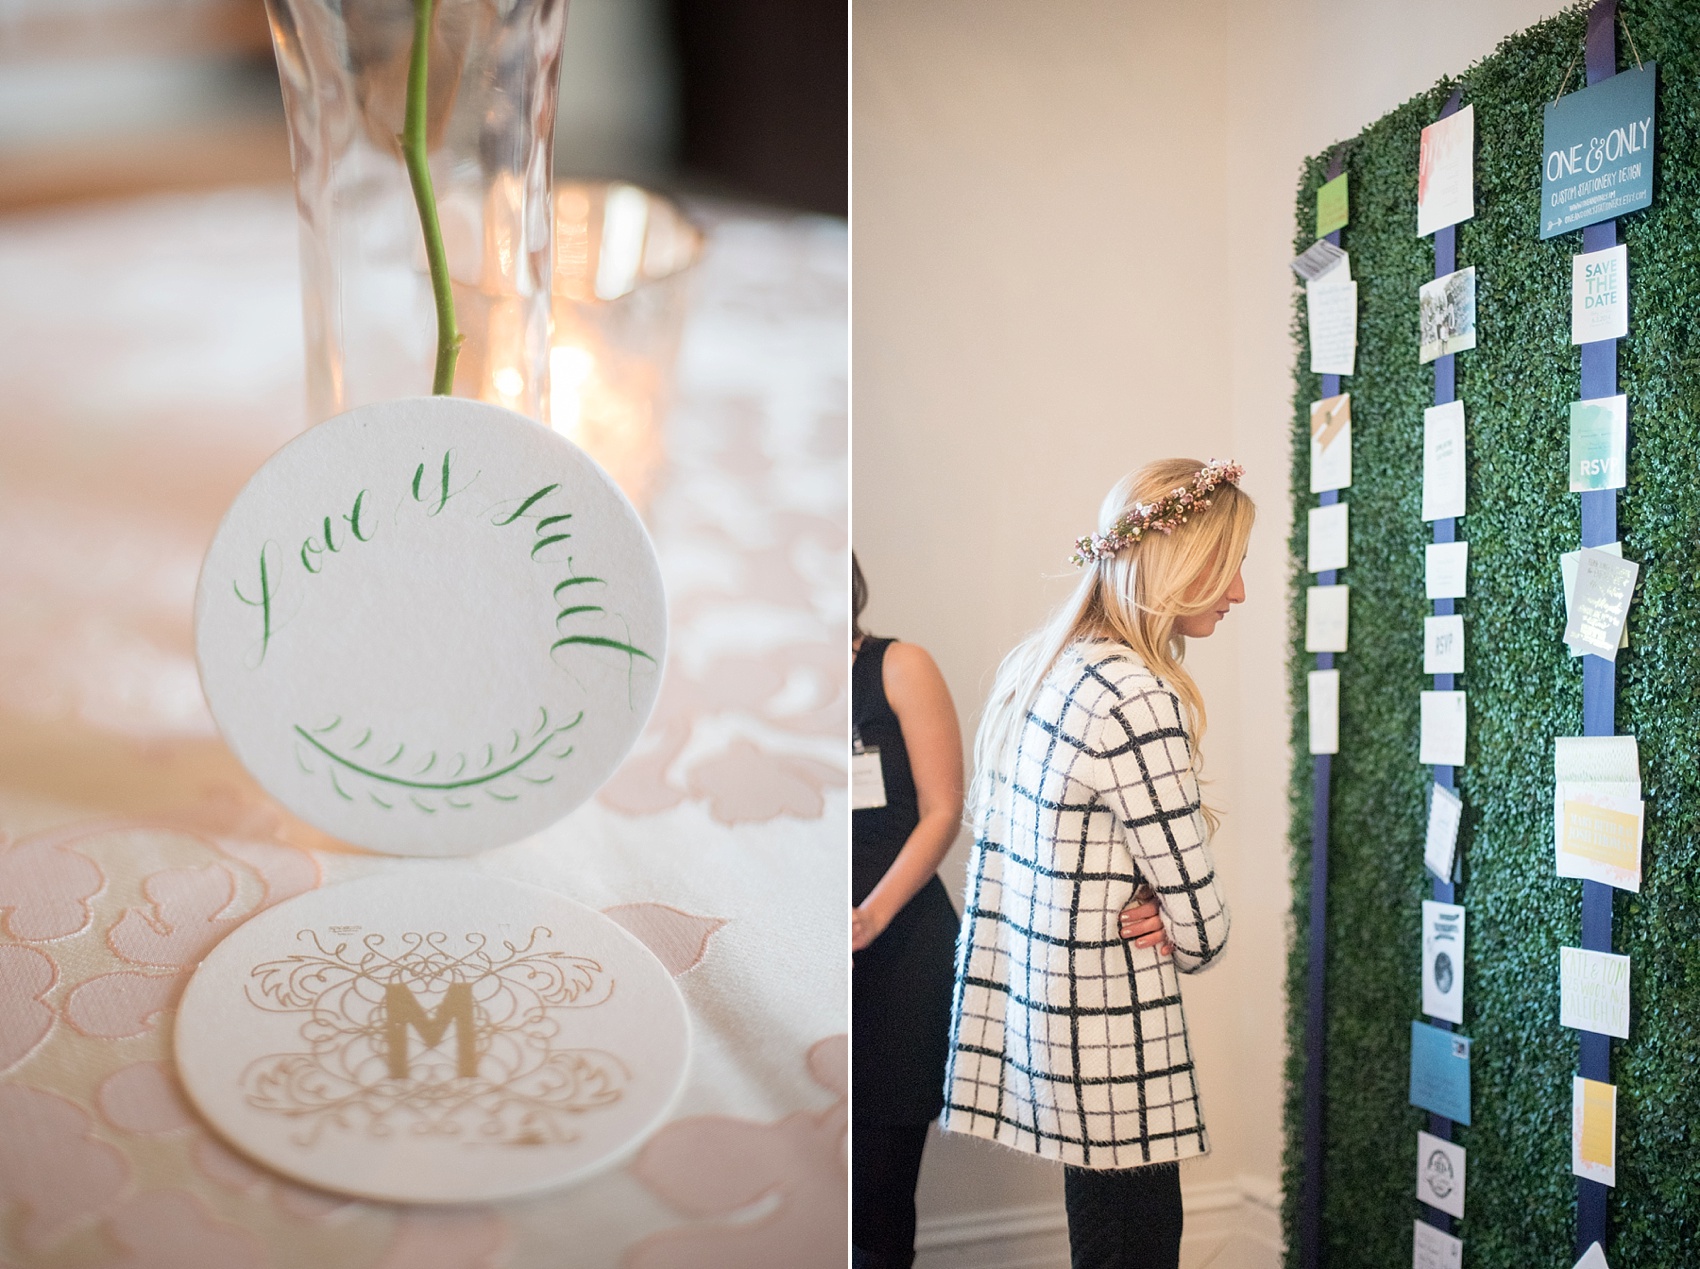 Raleigh North Carolina wedding photographer Mikkel Paige visits Merrimon-Wynne bridal event, featuring One and Only custom stationary and calligraphy.